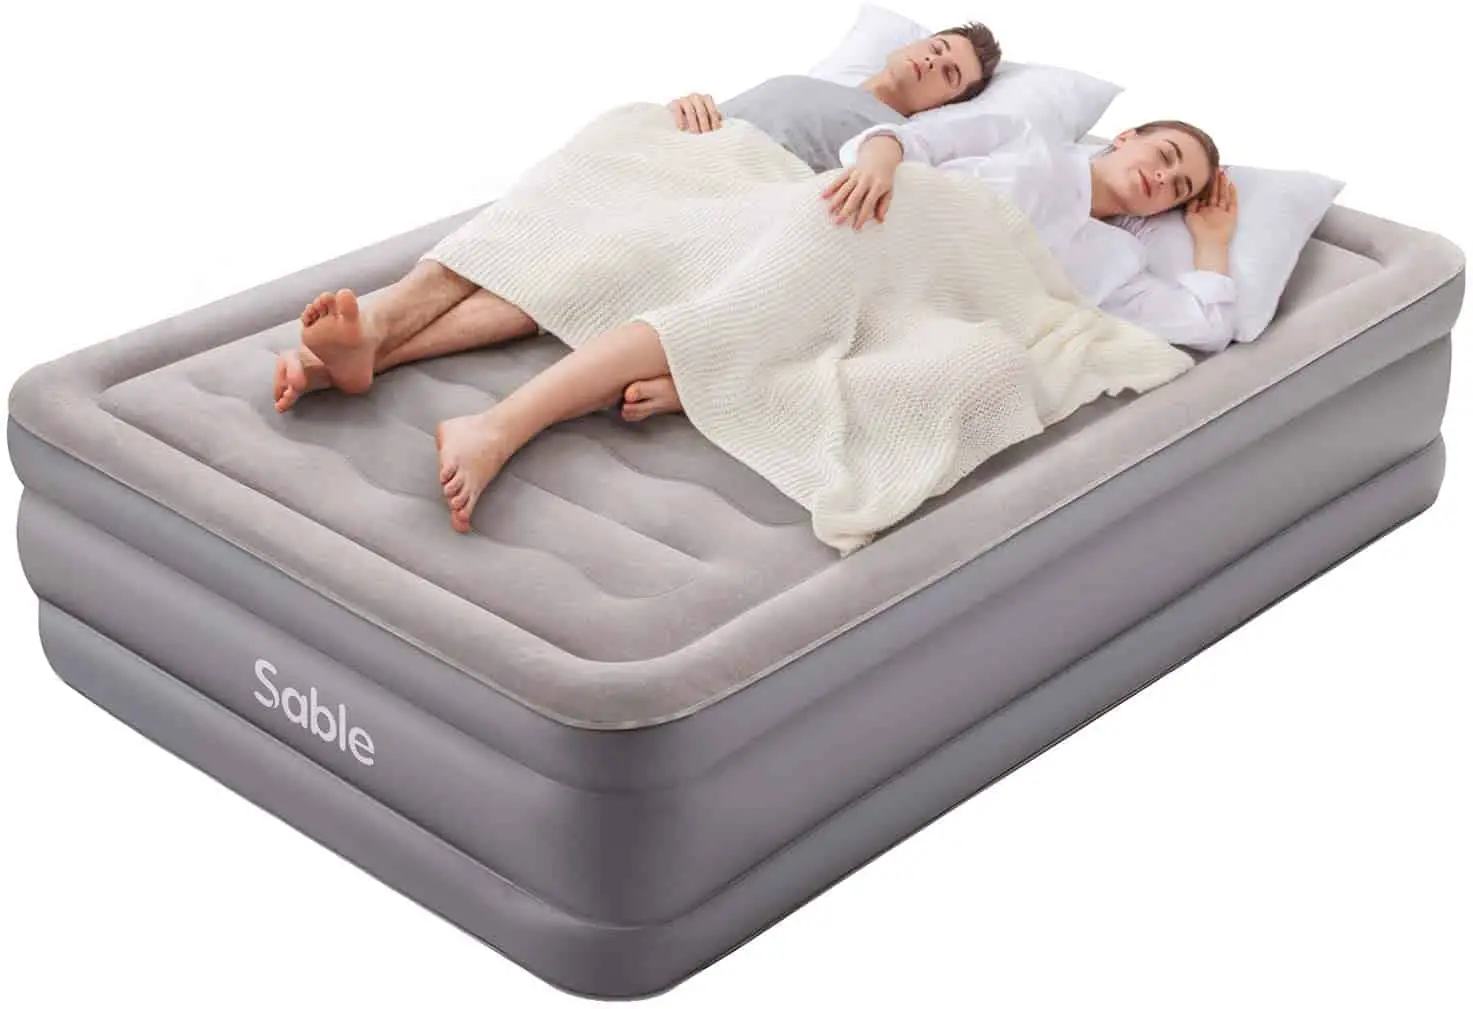 Air Bed Sable Air Mattress, Double Size Inflatable Blow Up Bed 